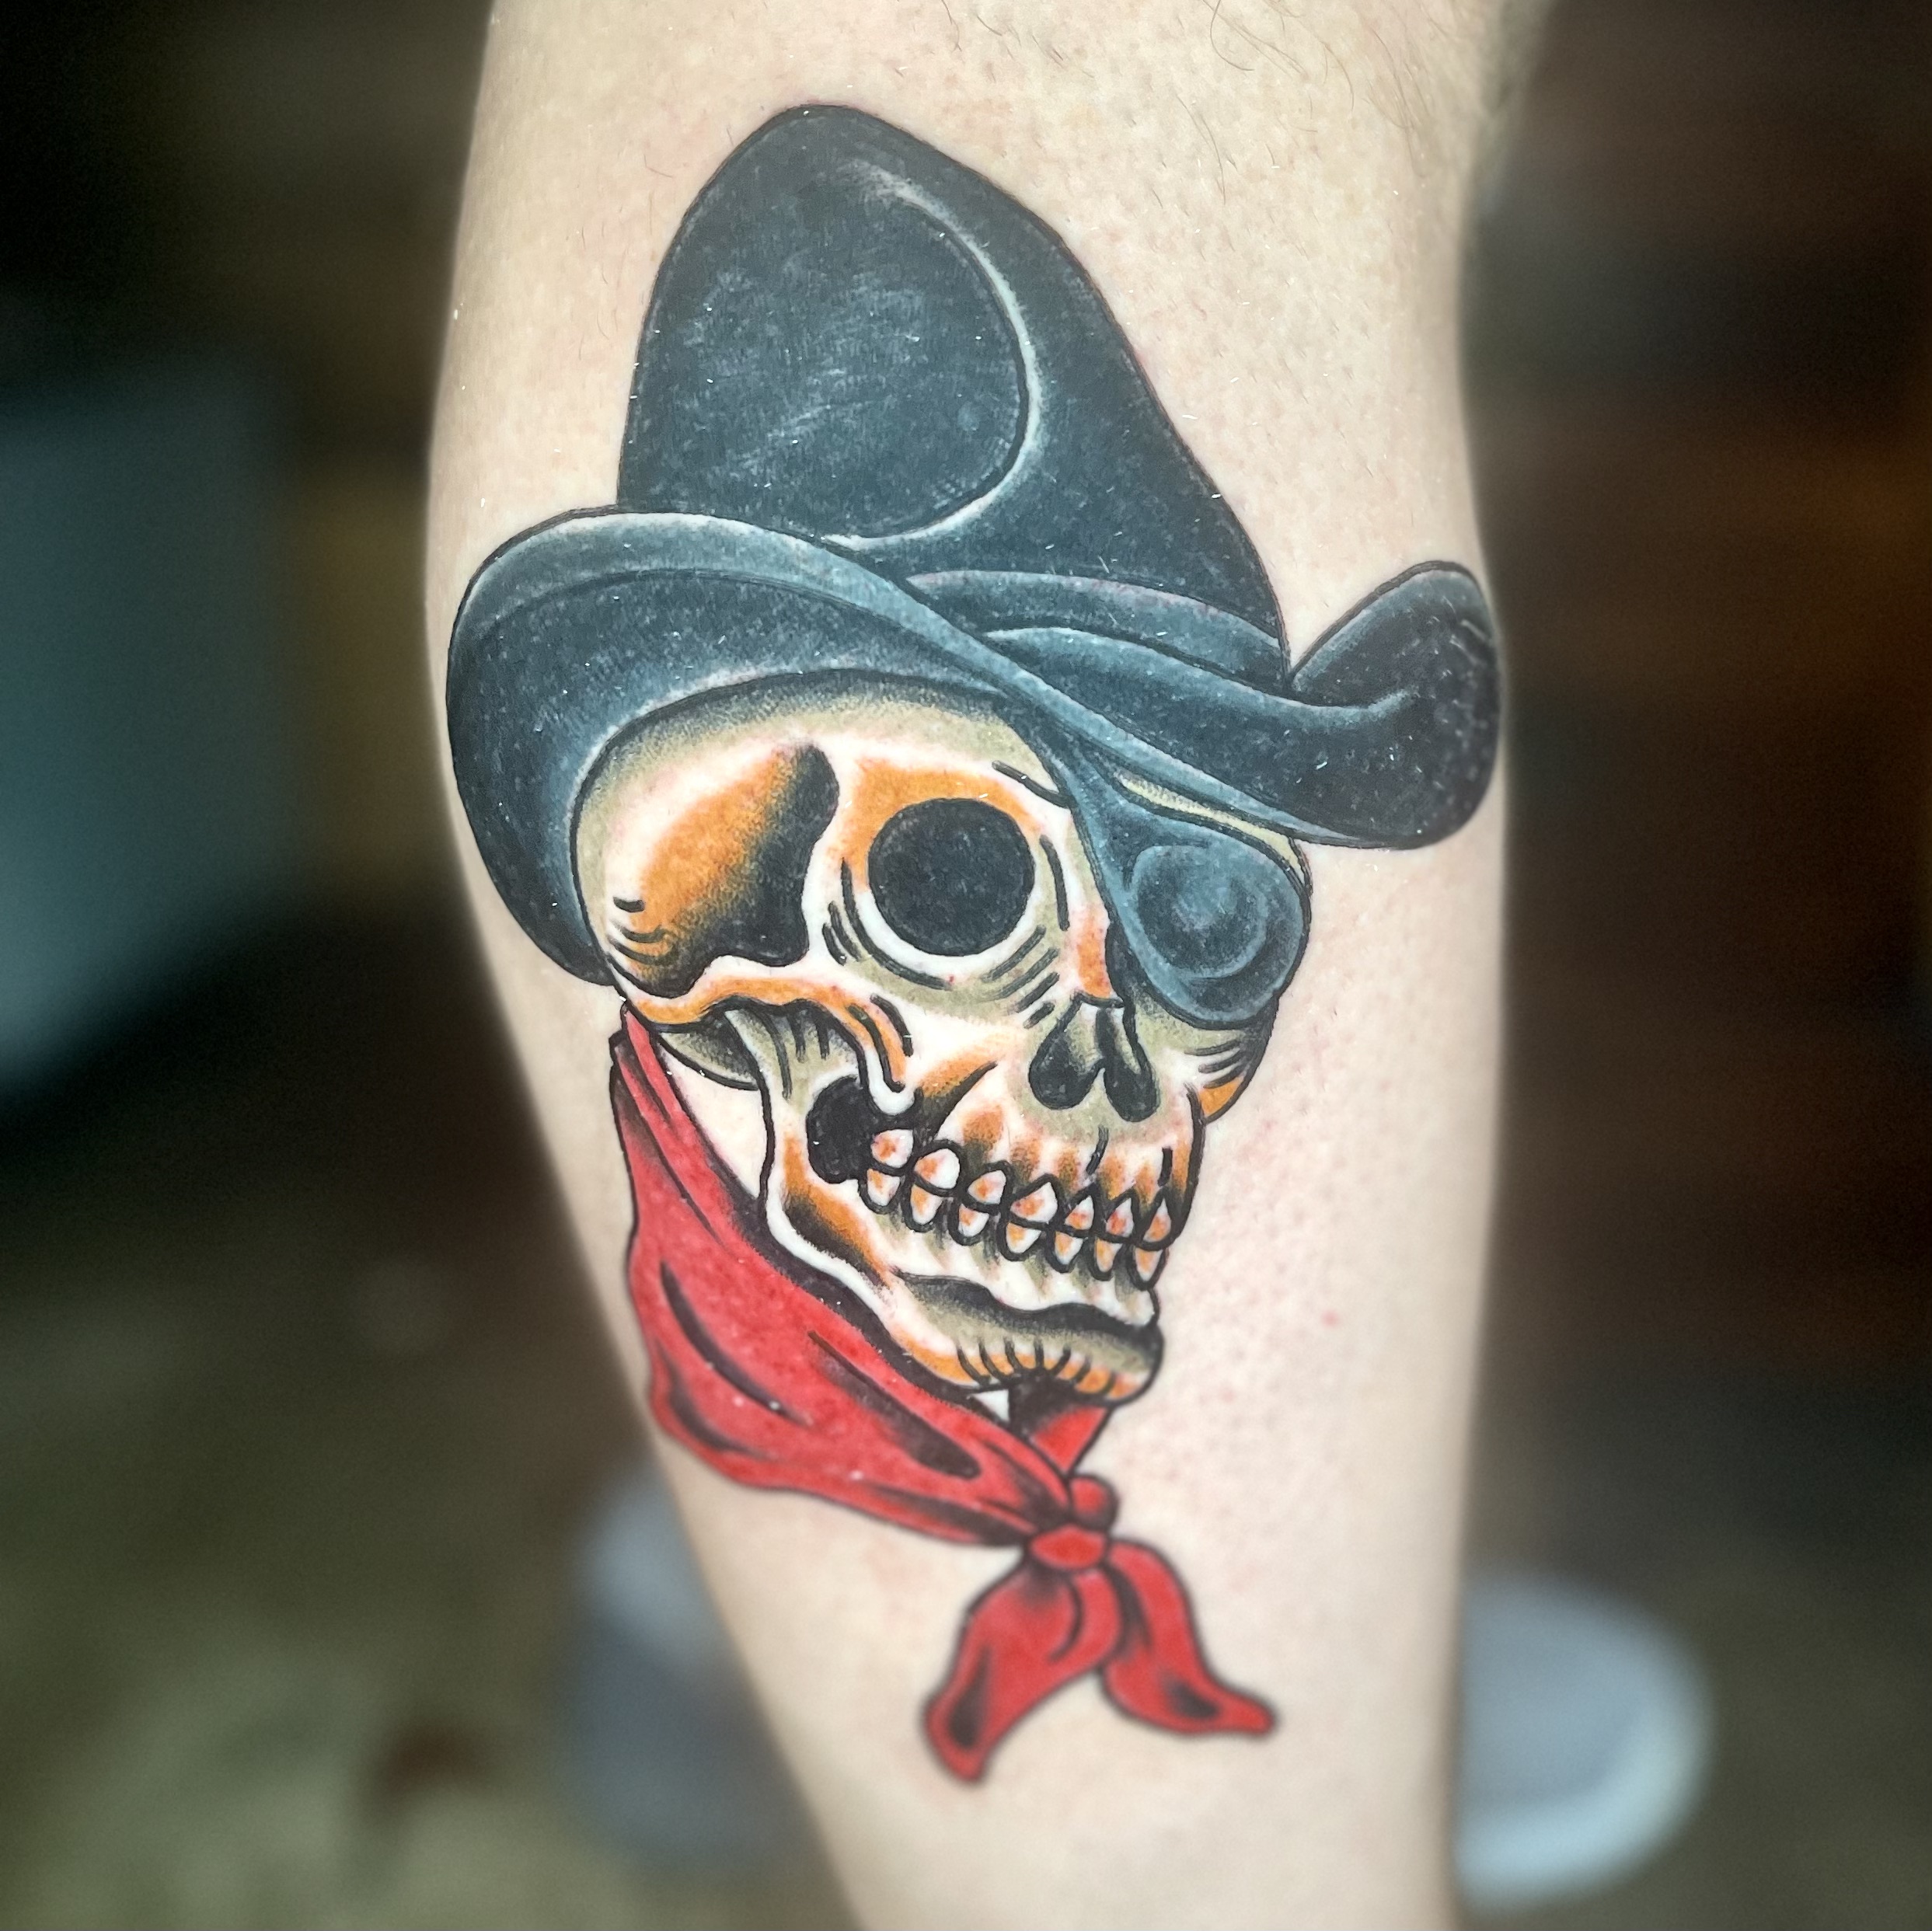 tattoo of a skull in a cowboy hat from top tattoo artists in dallas